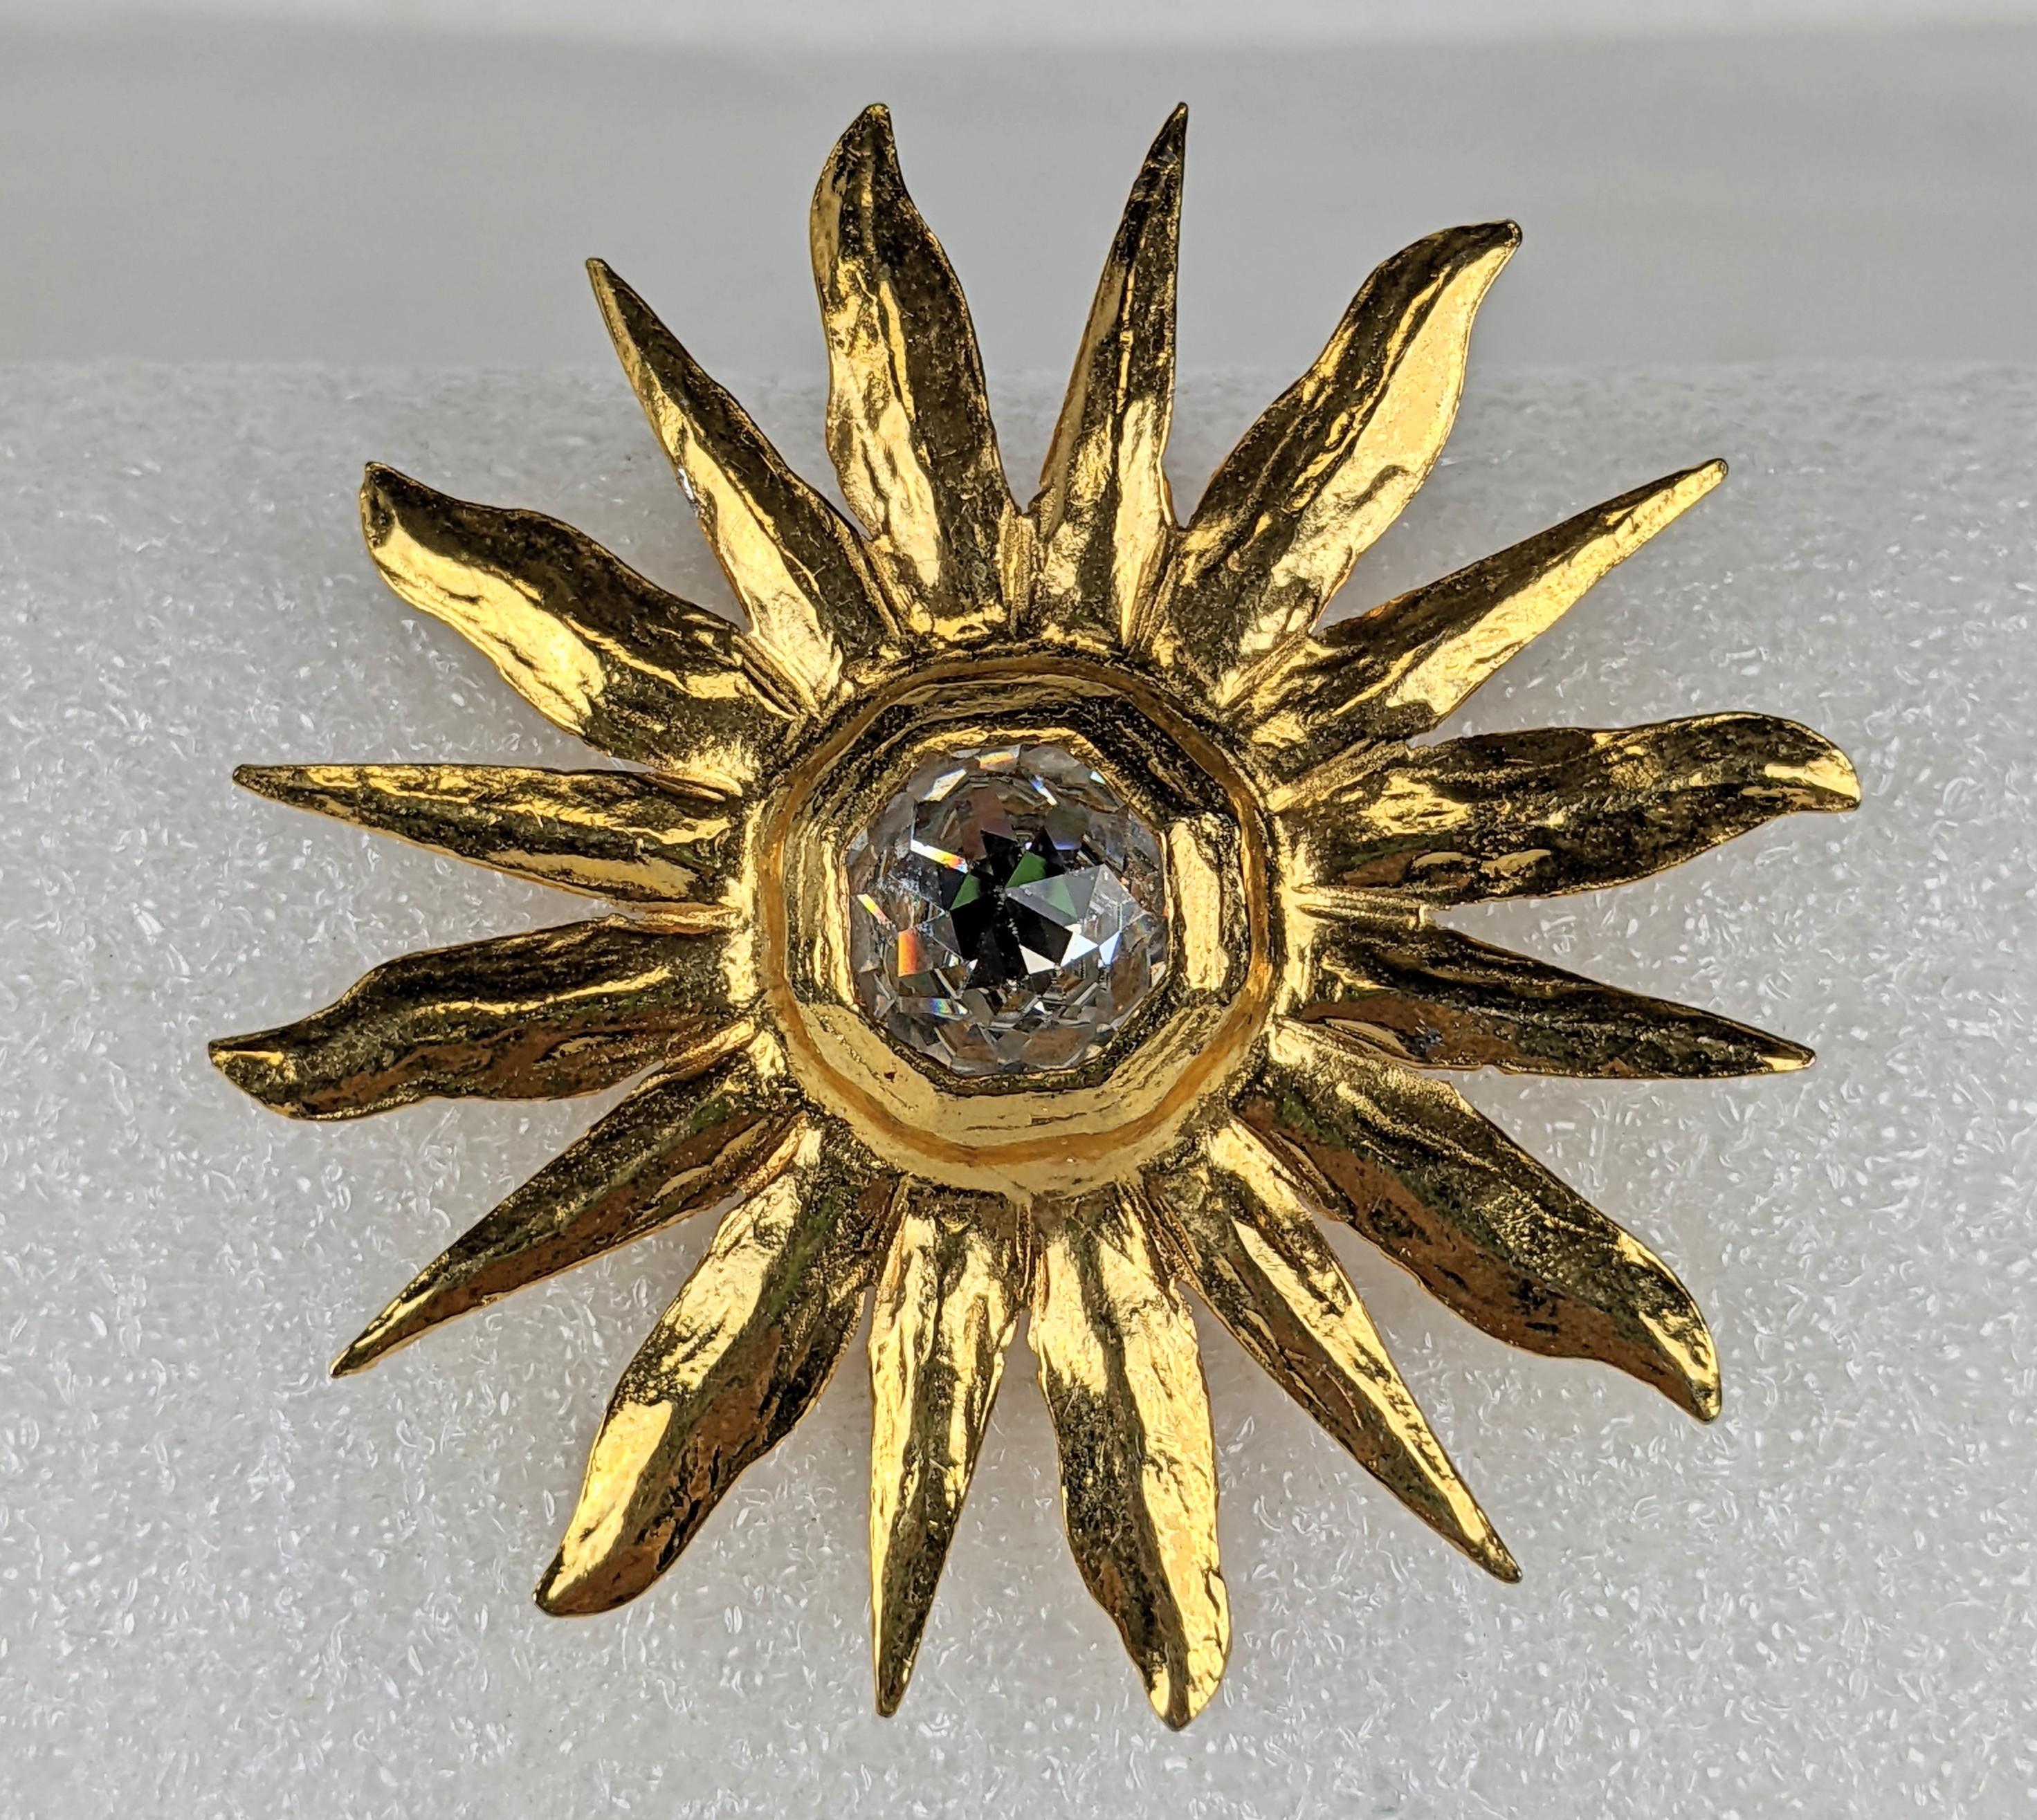 Large Yves Saint Laurent Starburst Brooch of gilt bronze in the Cocteau style by Maison Goossens. Central crystal is a rose cut pyramid. YSL Rive Gauche, 1980's France. 3